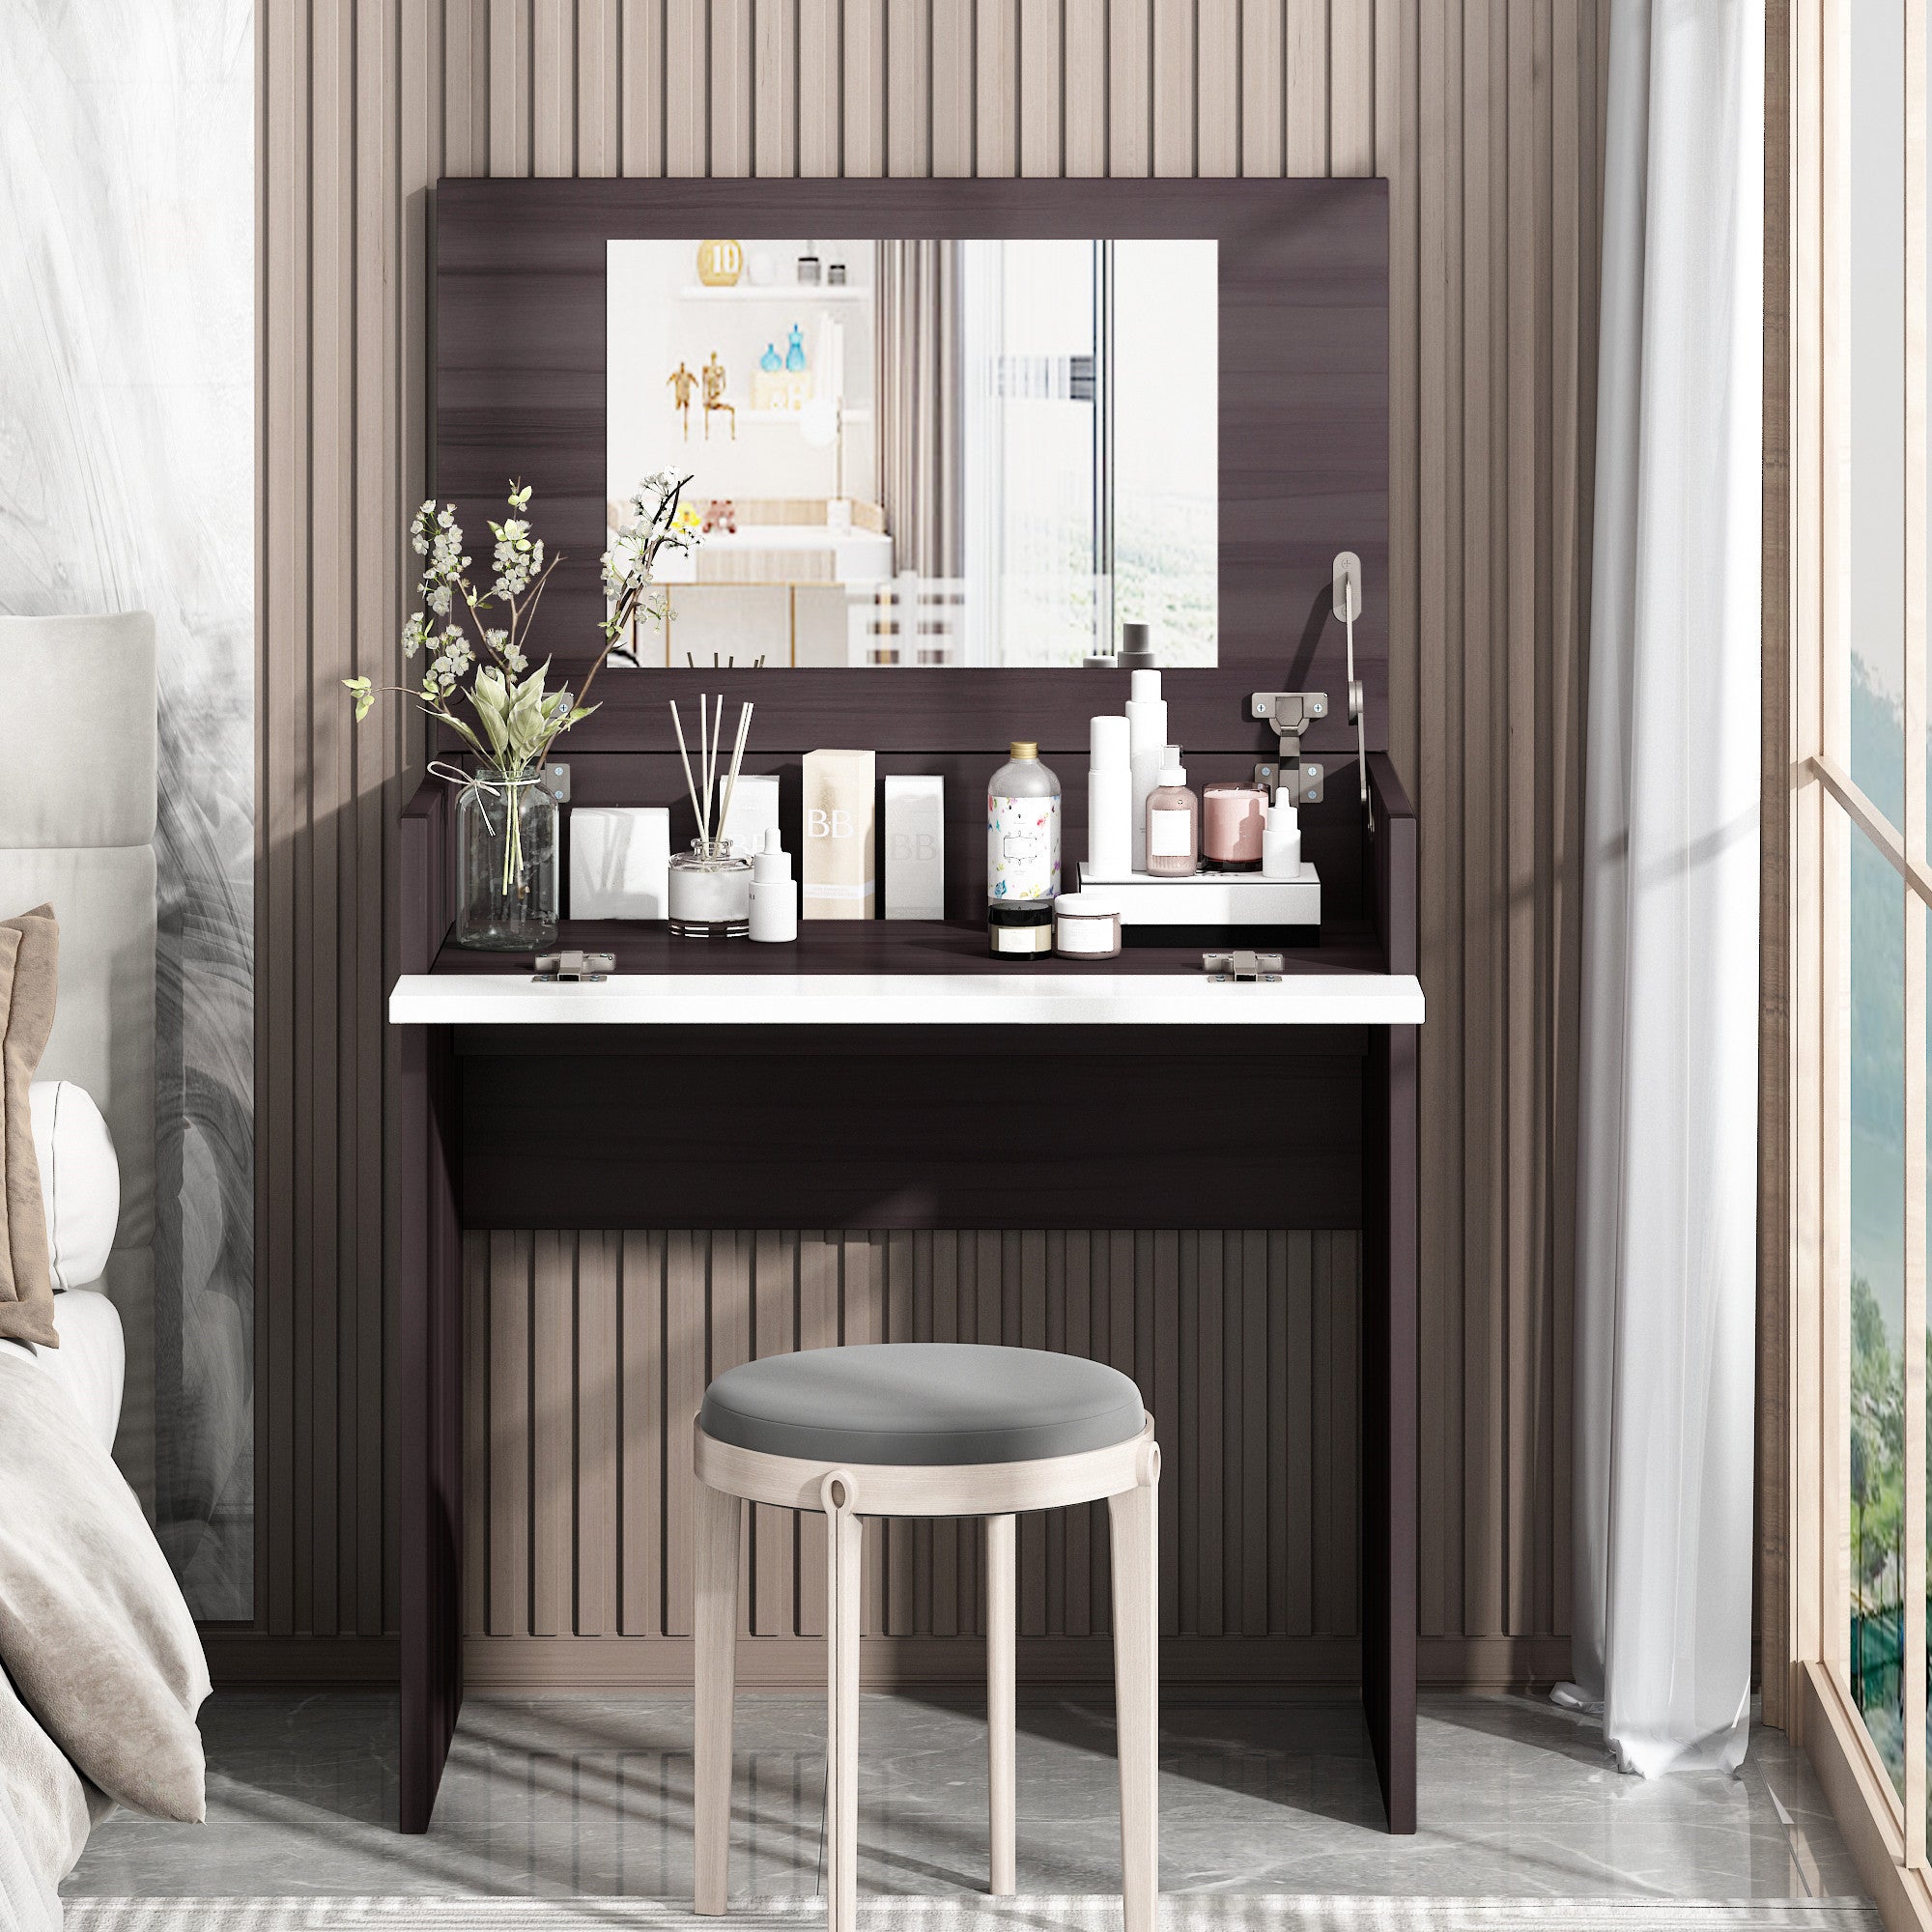 Vanity Make-up Dressing Table with Flip up Mirror Top(Ebony)